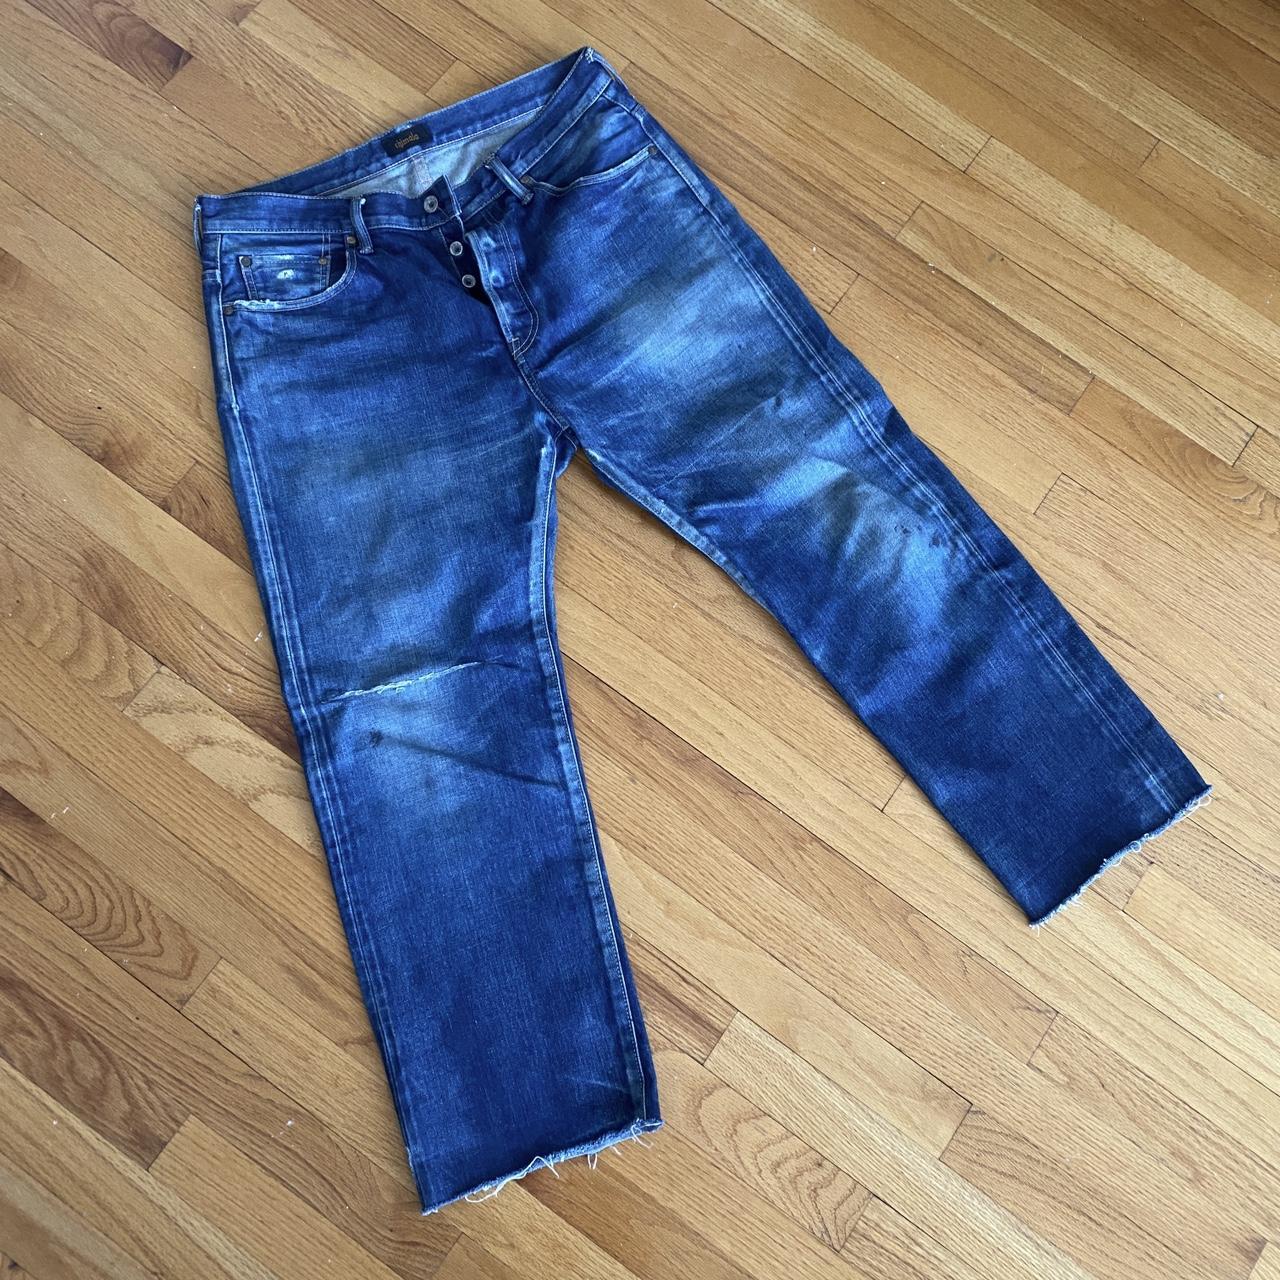 Chimala Men's Blue and Navy Jeans (5)